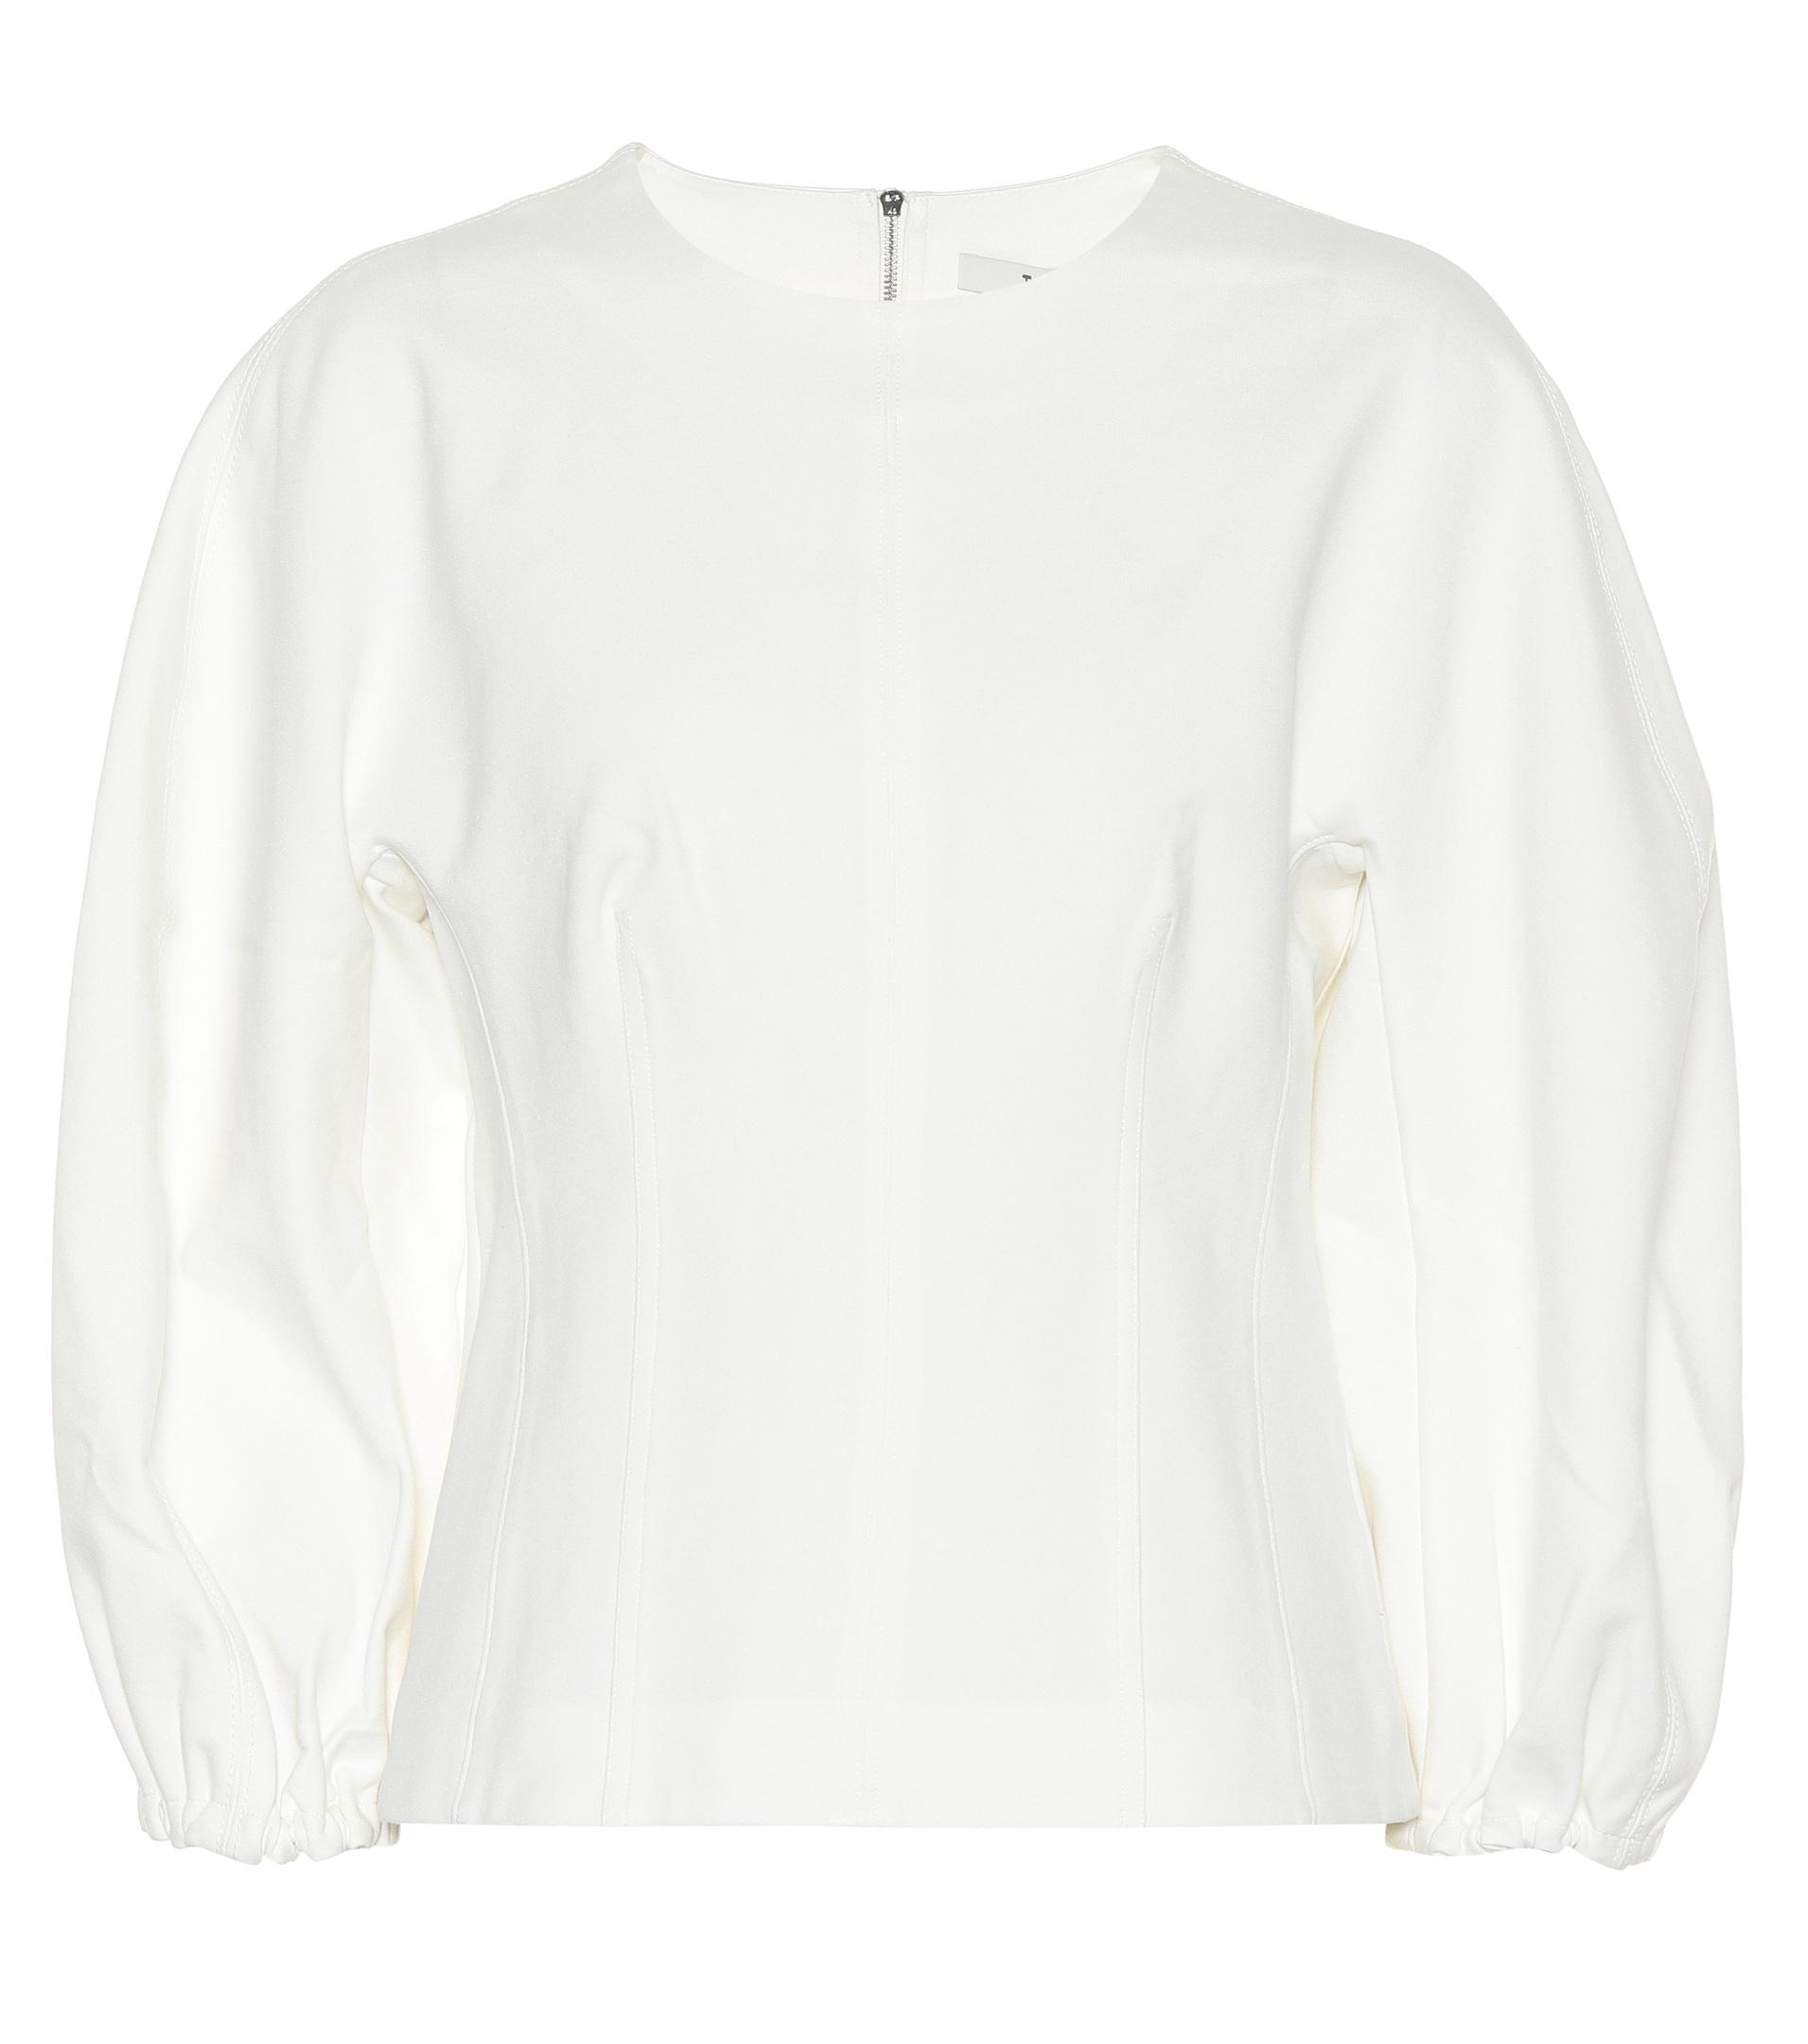 Tibi Synthetic Long-sleeved Top in White - Lyst